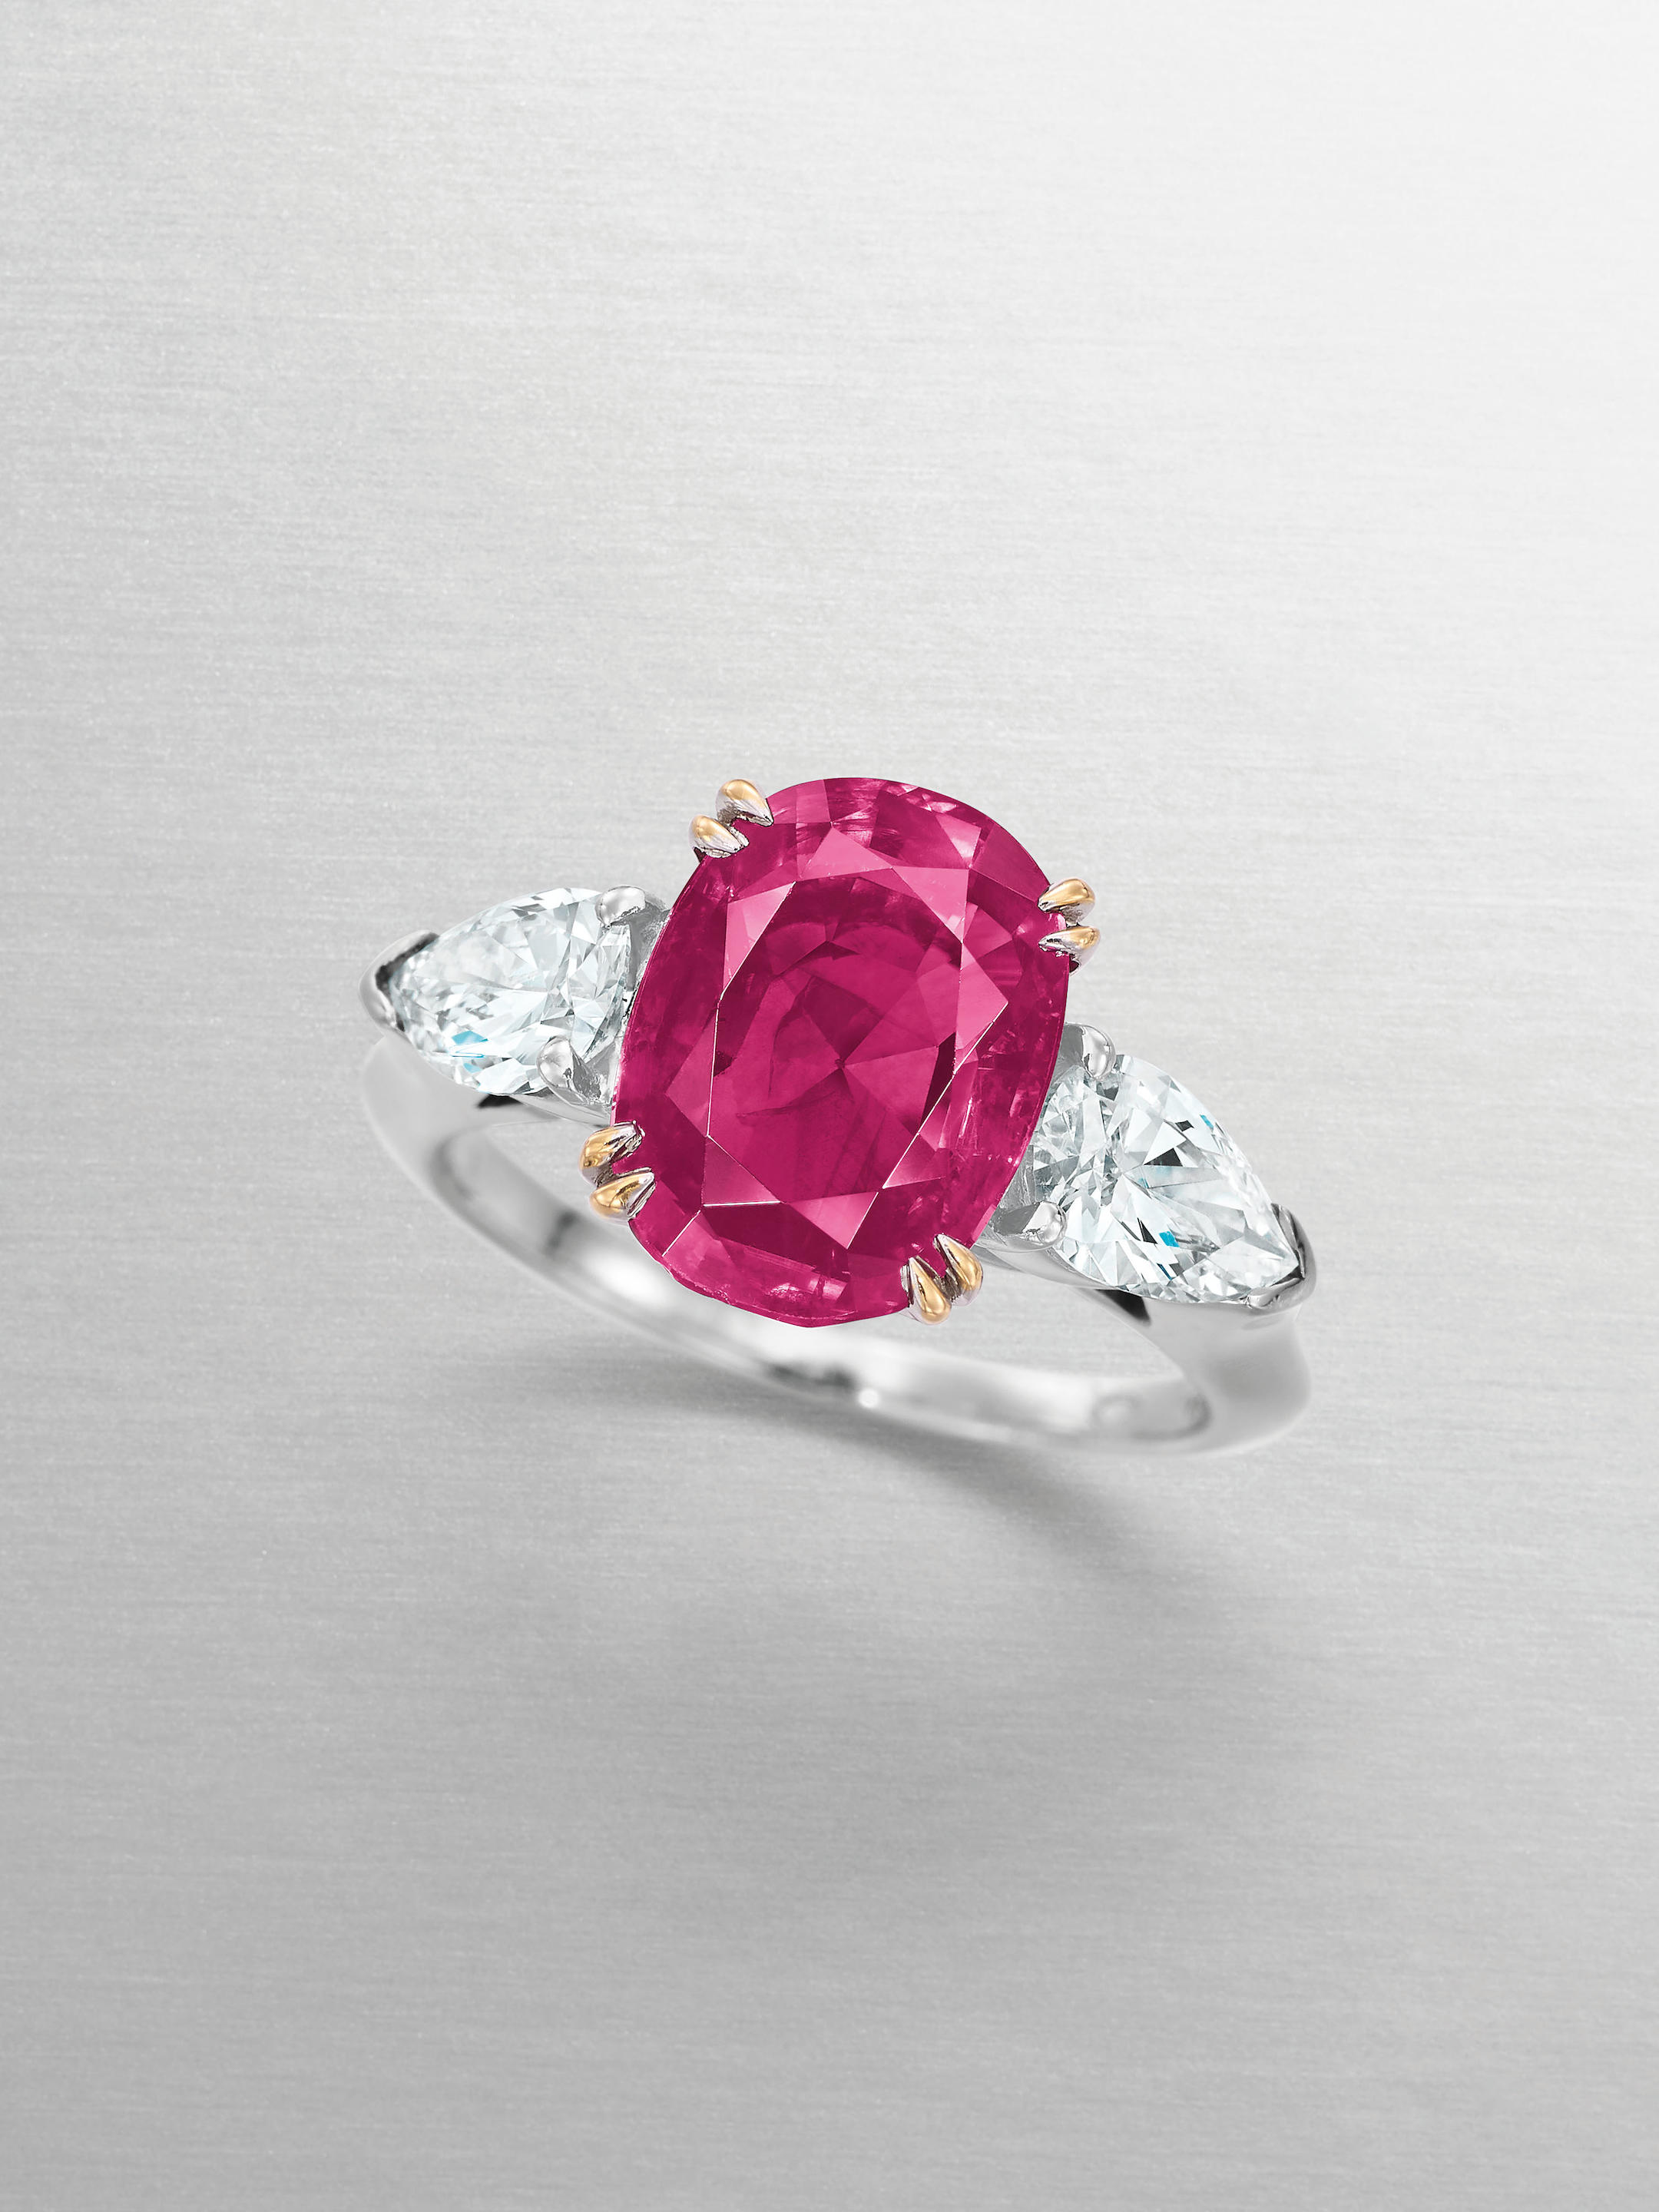 A FINE RUBY AND DIAMOND RING